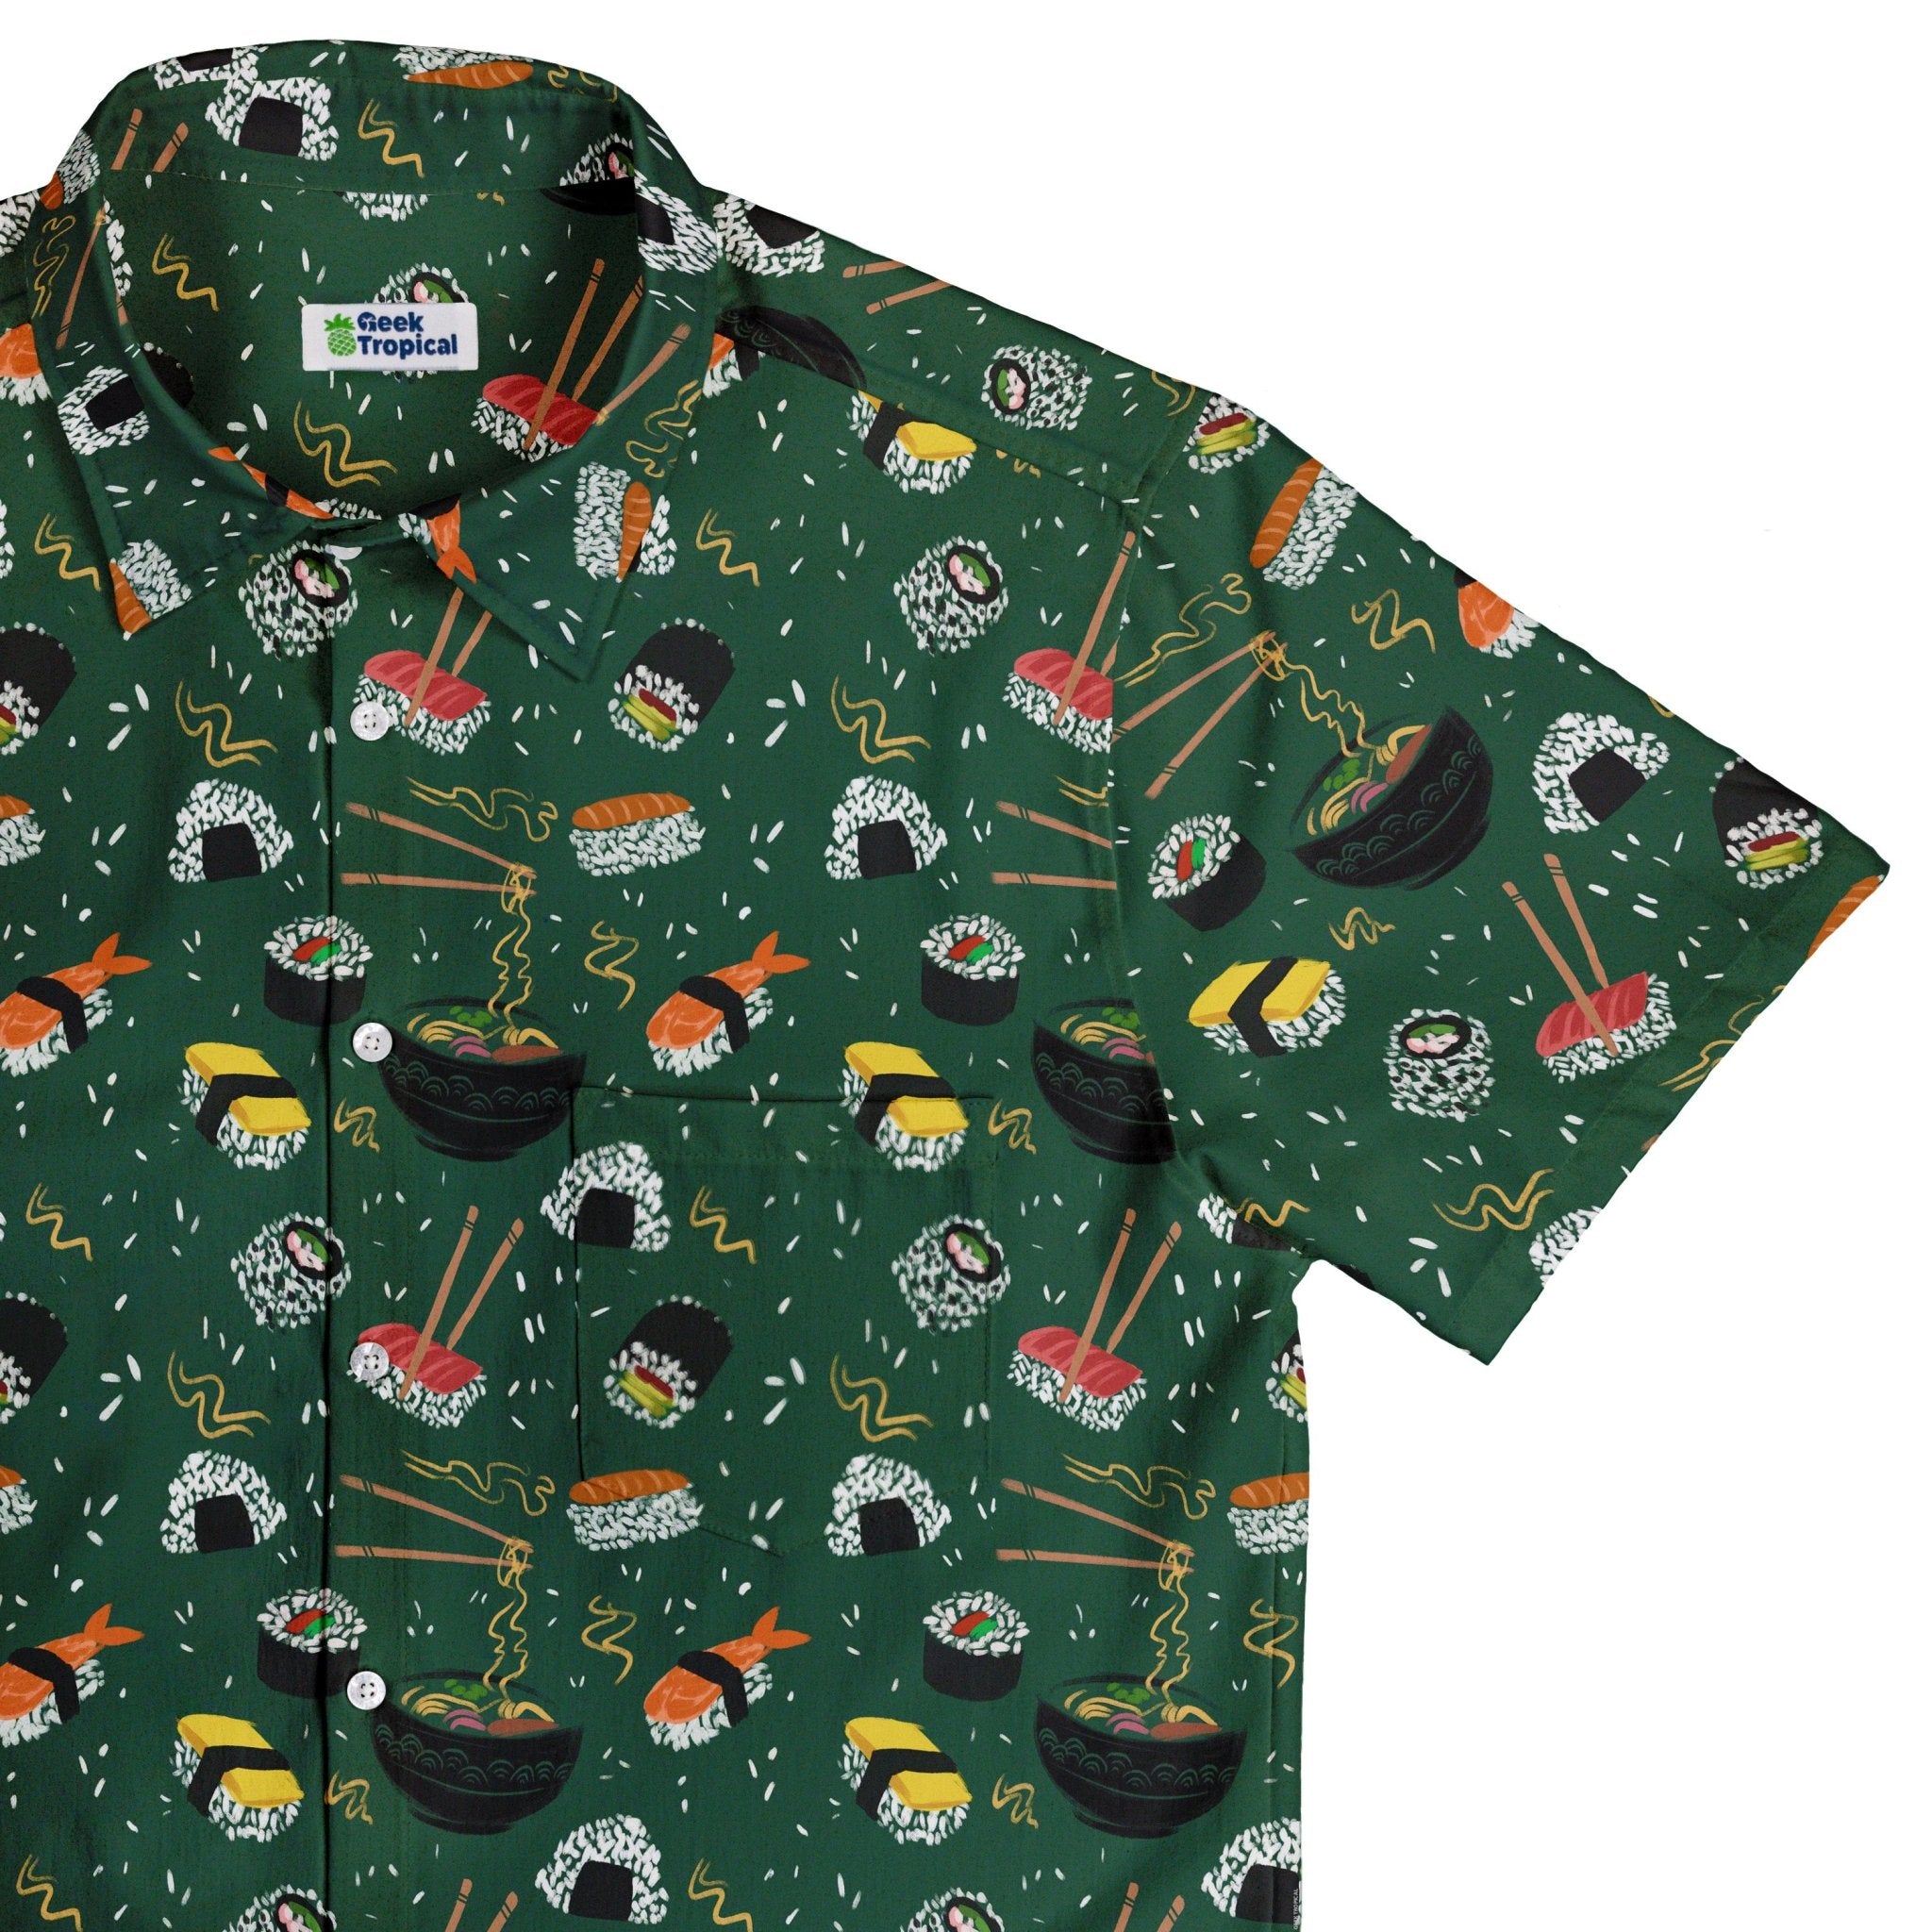 Ōishi Sushi Green Button Up Shirt - adult sizing - Anime - Design by Claire Murphy